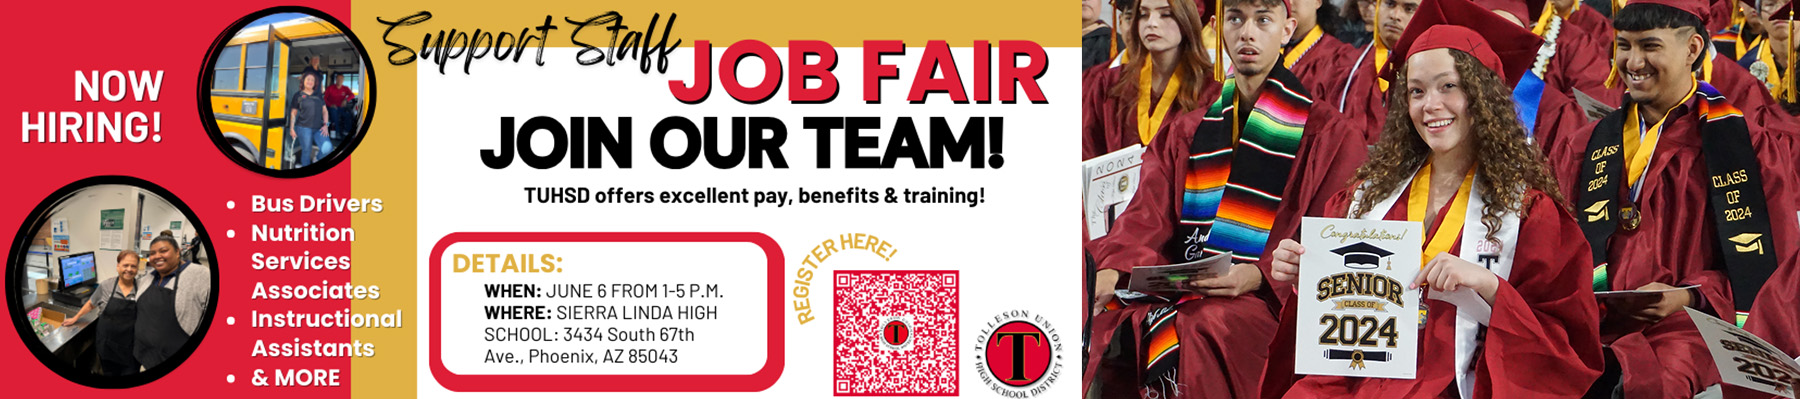 TUHSD Job Fair- we offer excellent pay, benefits, & training! Hiring bus drivers, nutrition services associates, instructional assistants & more. June 6 from 1-5 pm at Sierra Linda HS in Phoenix, AZ 85043 | Two student sitting in class